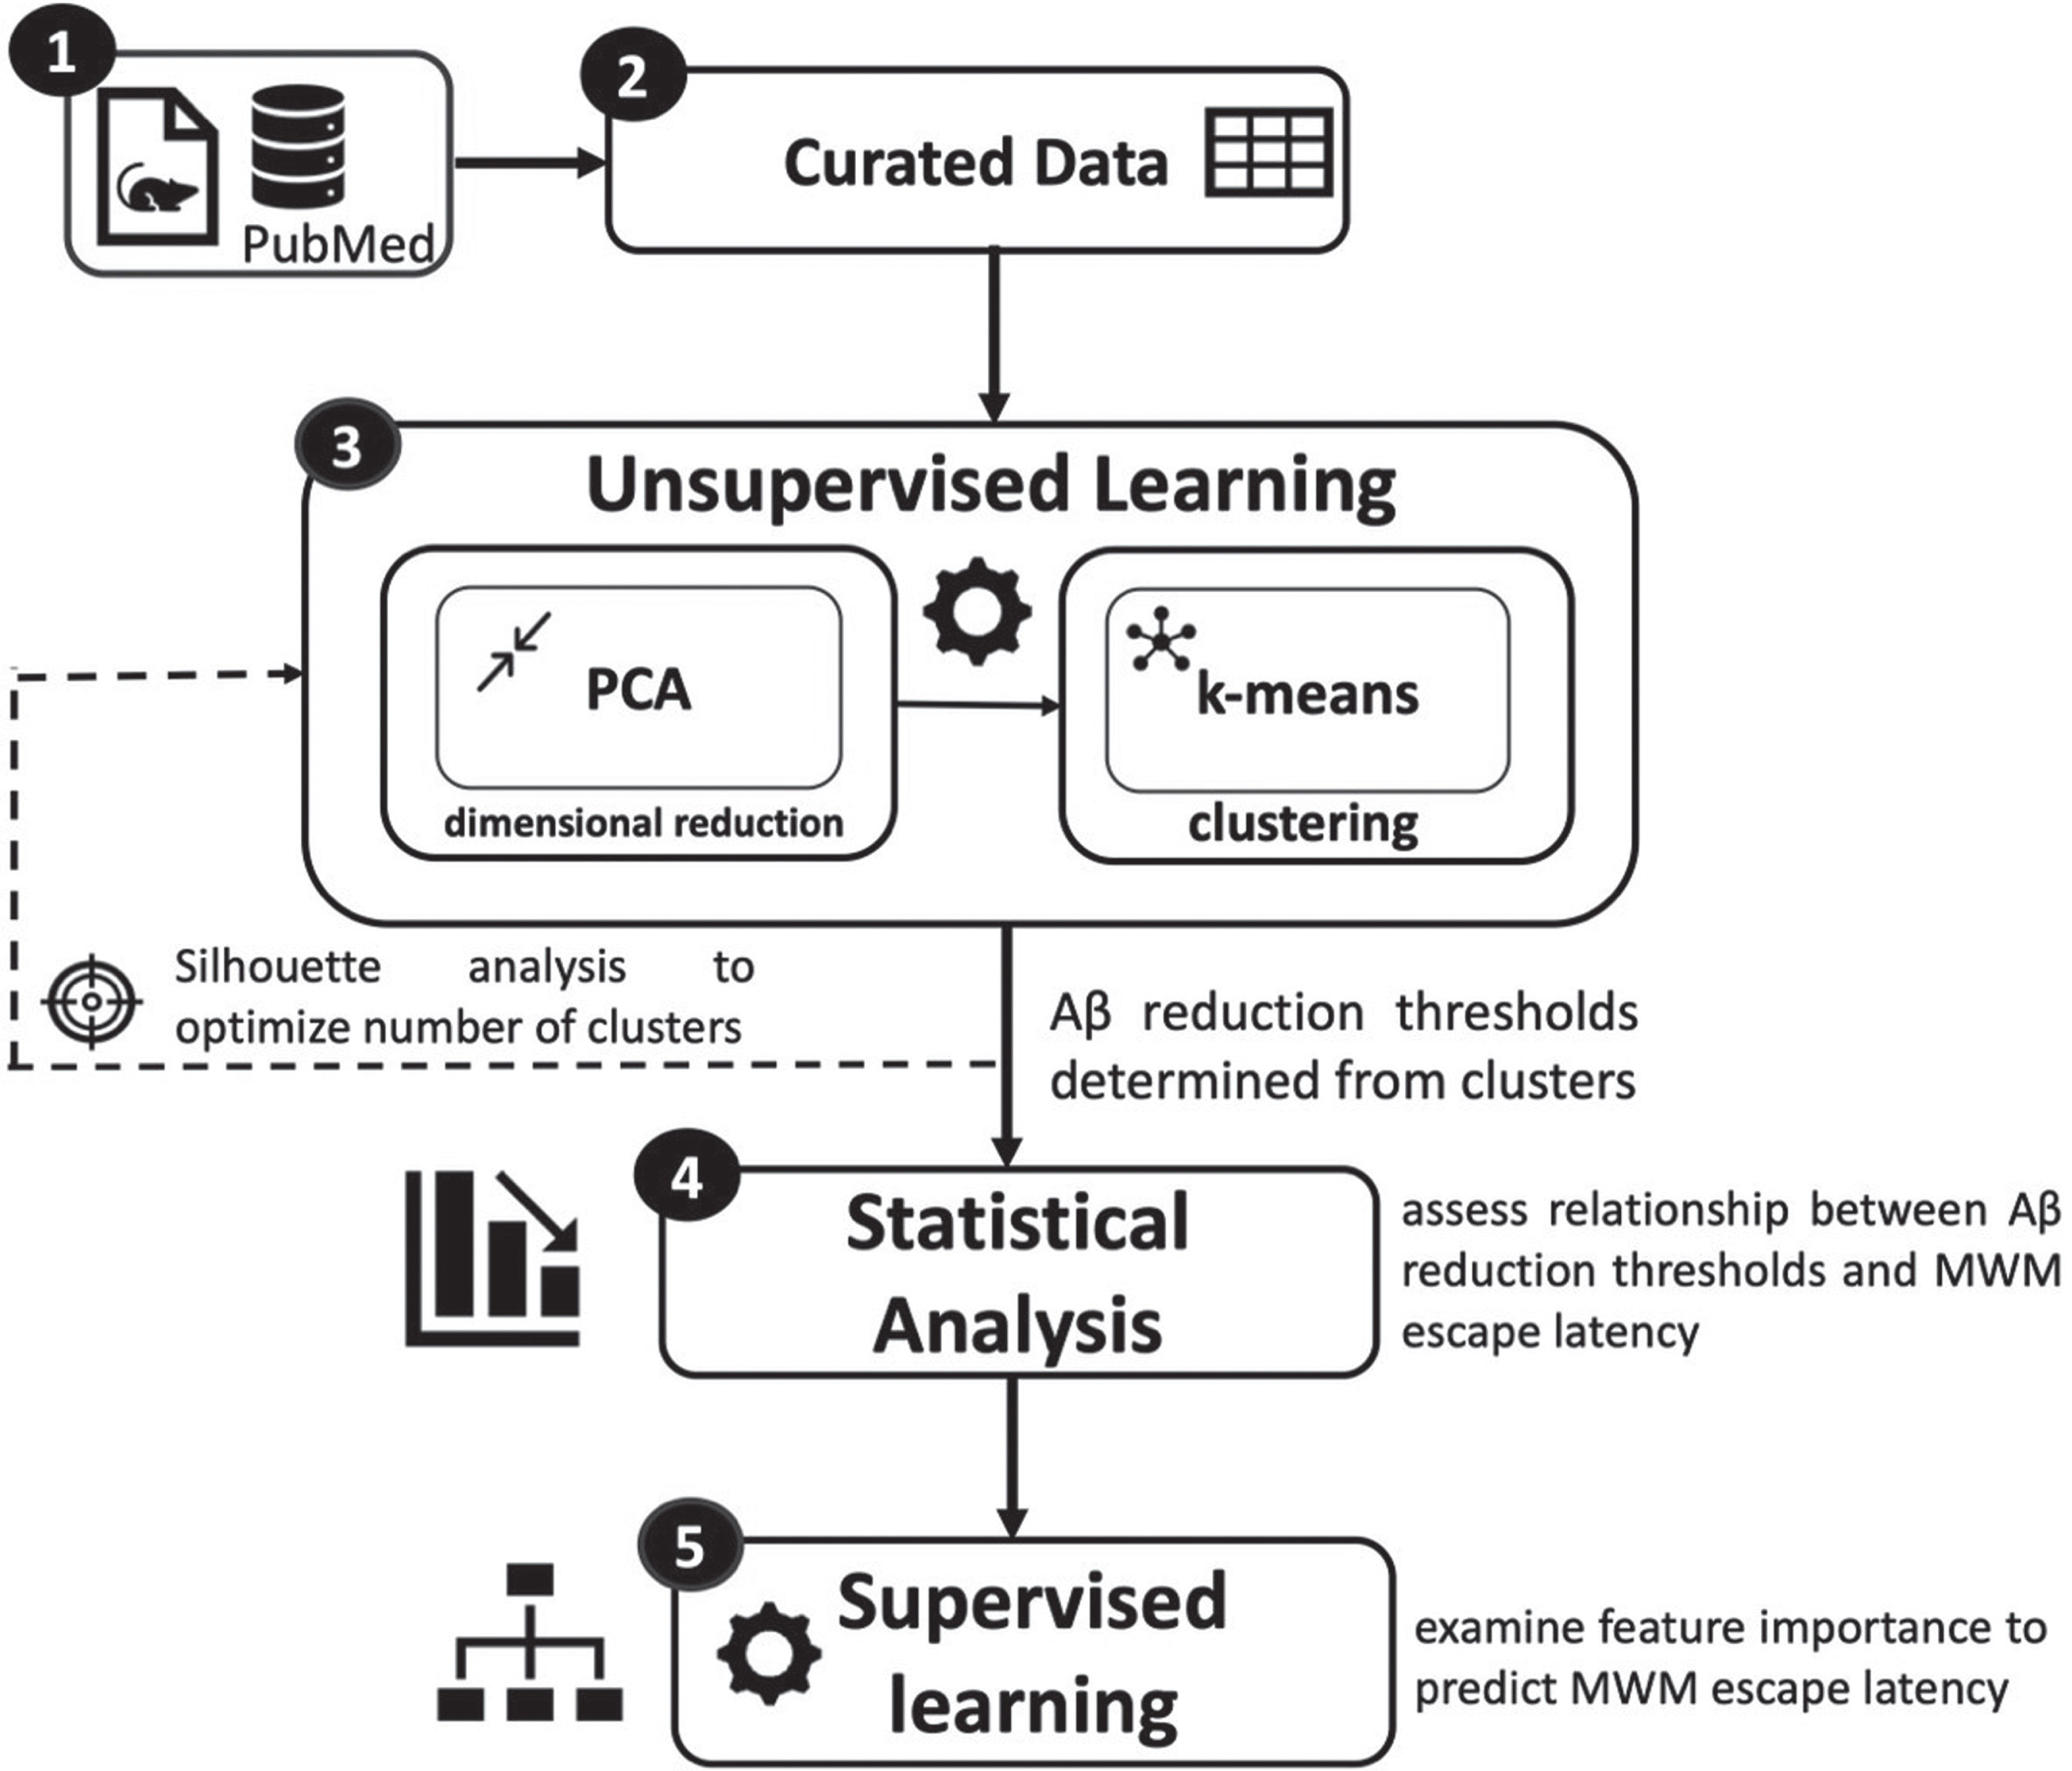 Overview of data pipeline and analysis. Continuous and categorical features were curated from 22 journal articles. A combination of machine learning and statistical analysis techniques were utilized to quantify Aβ reduction thresholds necessary to meaningfully improve AD transgenic mouse cognition measured via the Morris Water Maze escape latency.